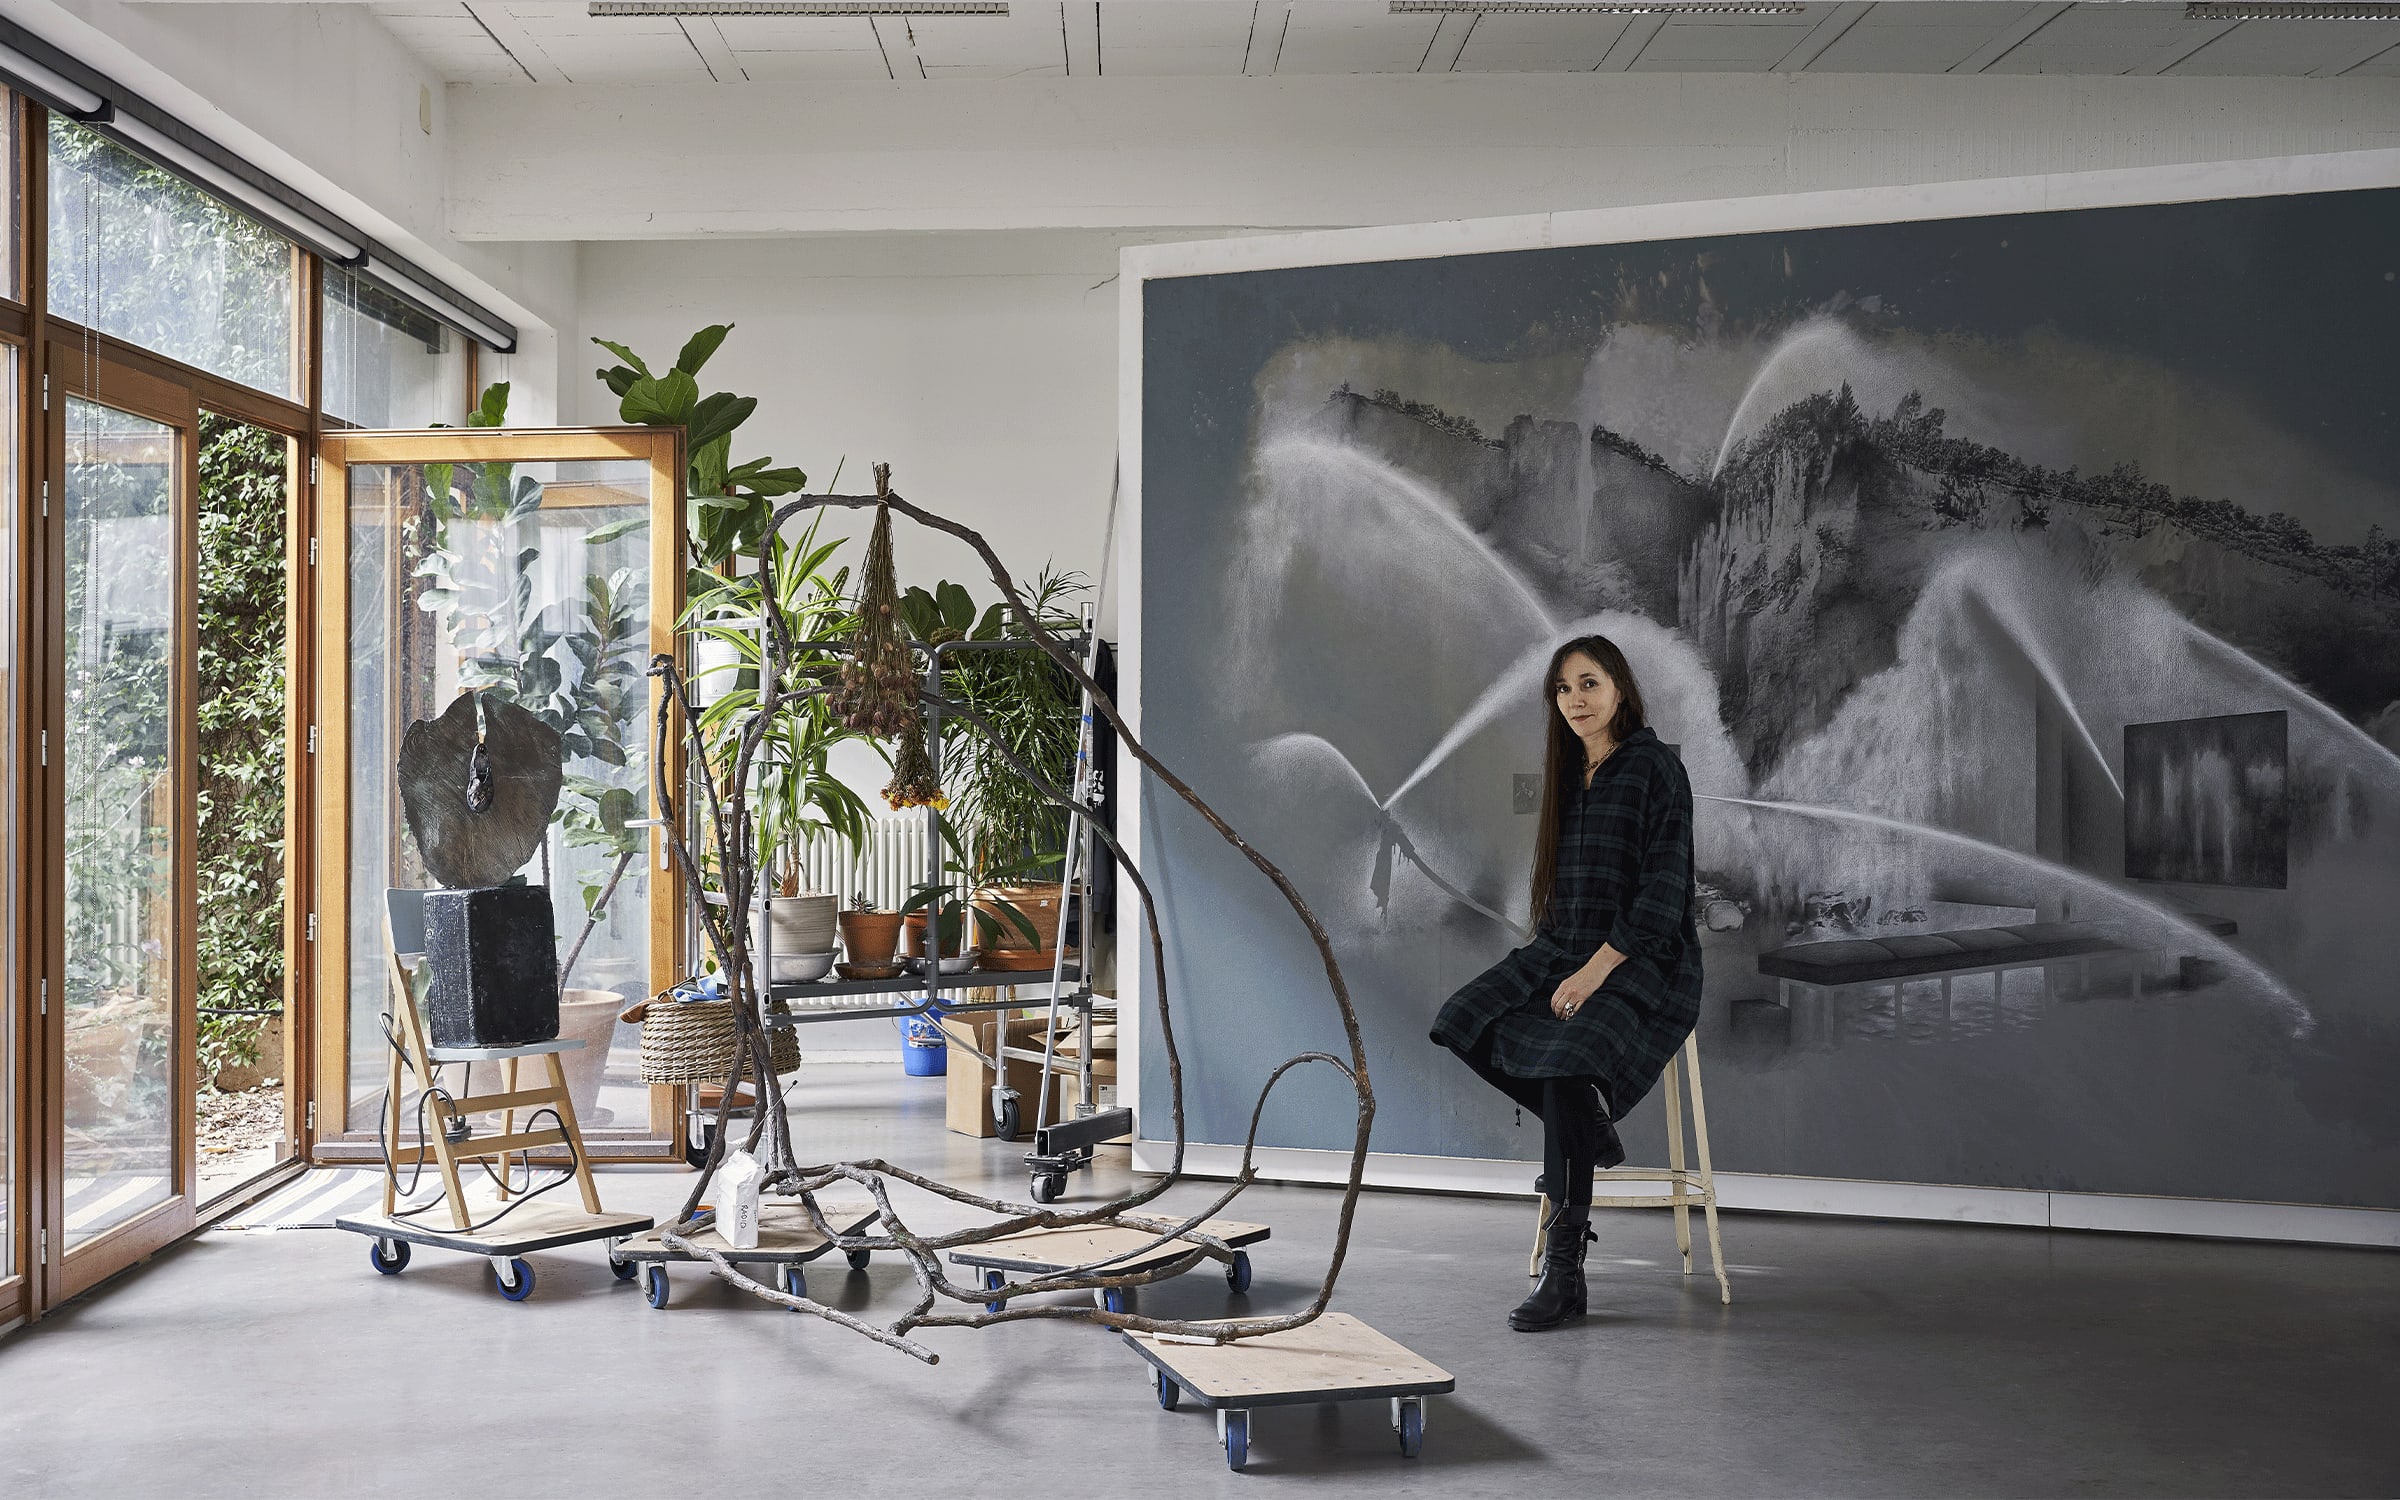 Tatiana Trouvé in her studio in Montreuil. Photograph by Thomas Lannes.